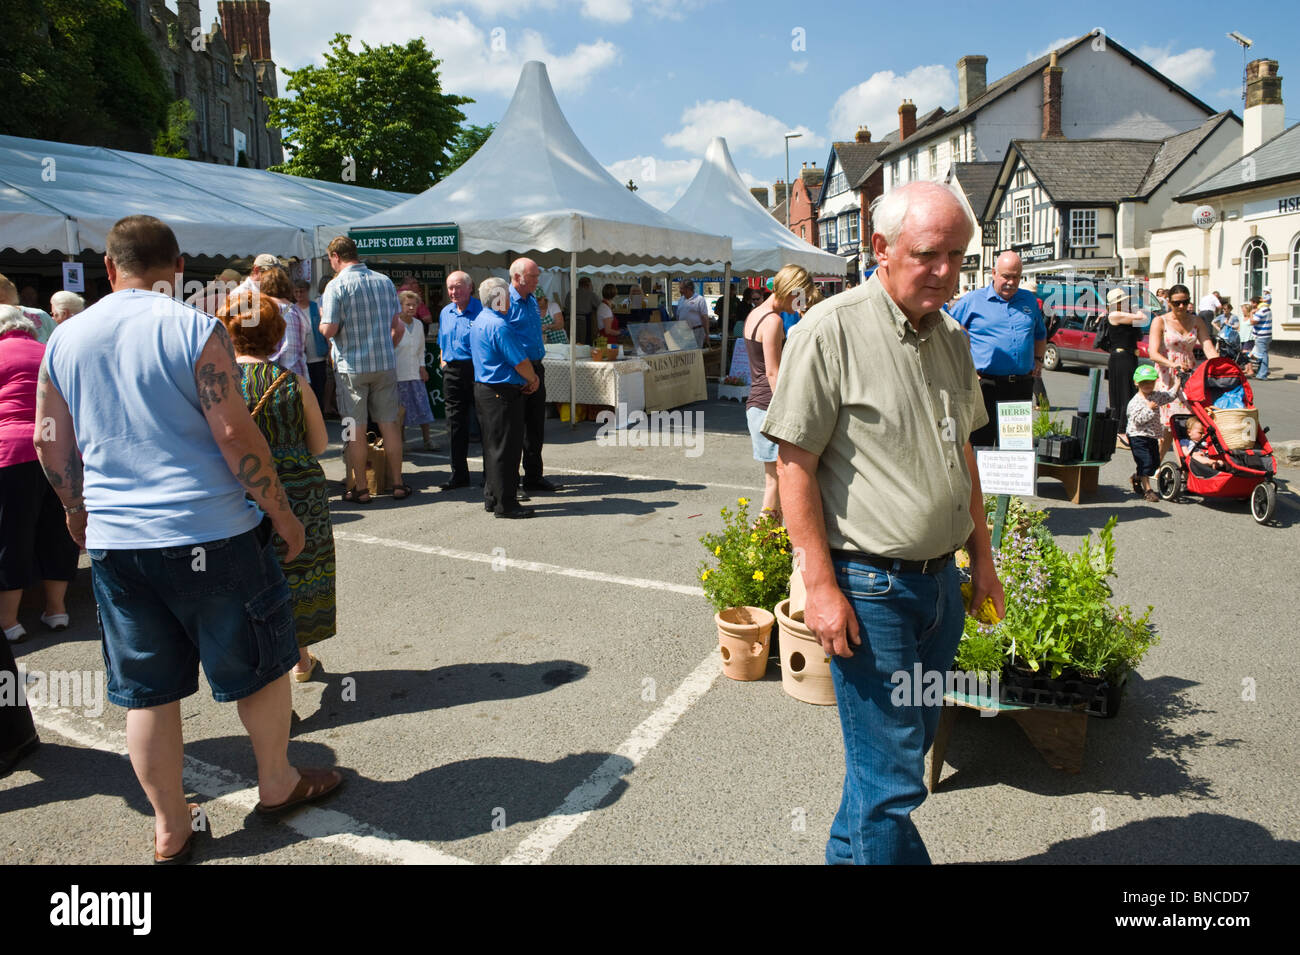 People enjoying the Hay Food Festival in the market square in Hay-on-Wye Powys Wales UK Stock Photo